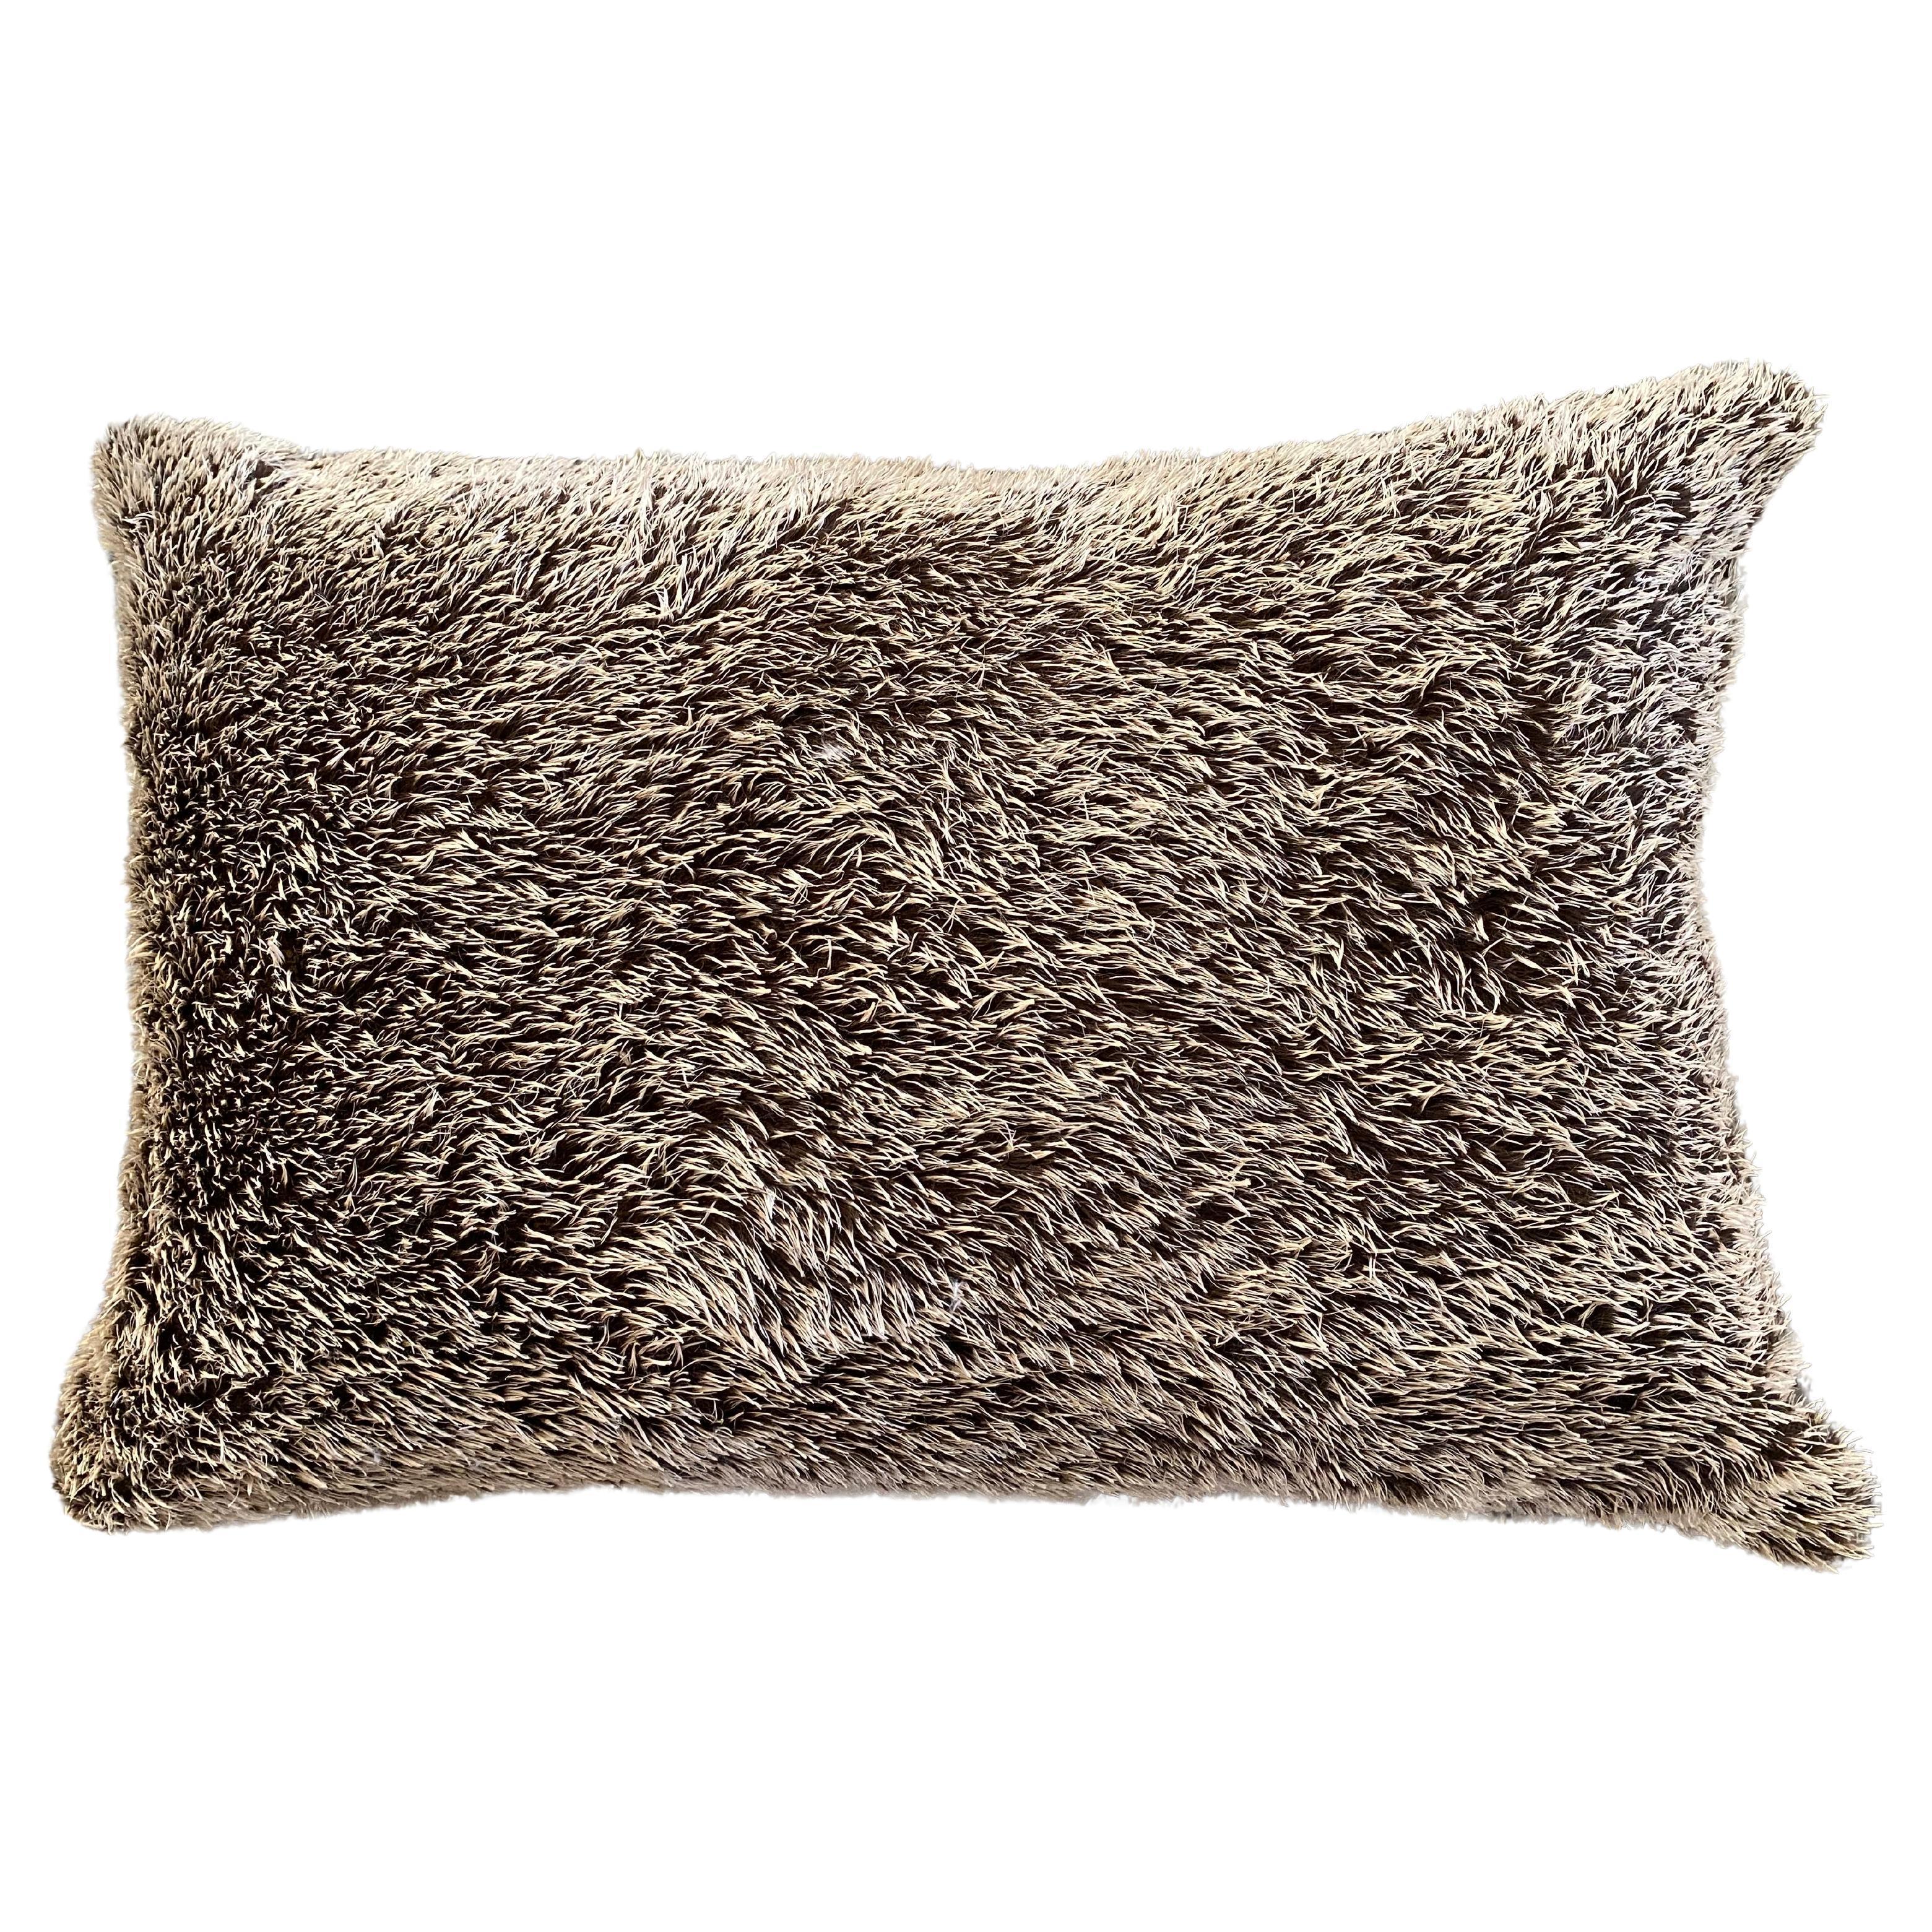 American Mountain Inspired Lumbar Pillow with Turquoise Accent and Porcupine Back For Sale